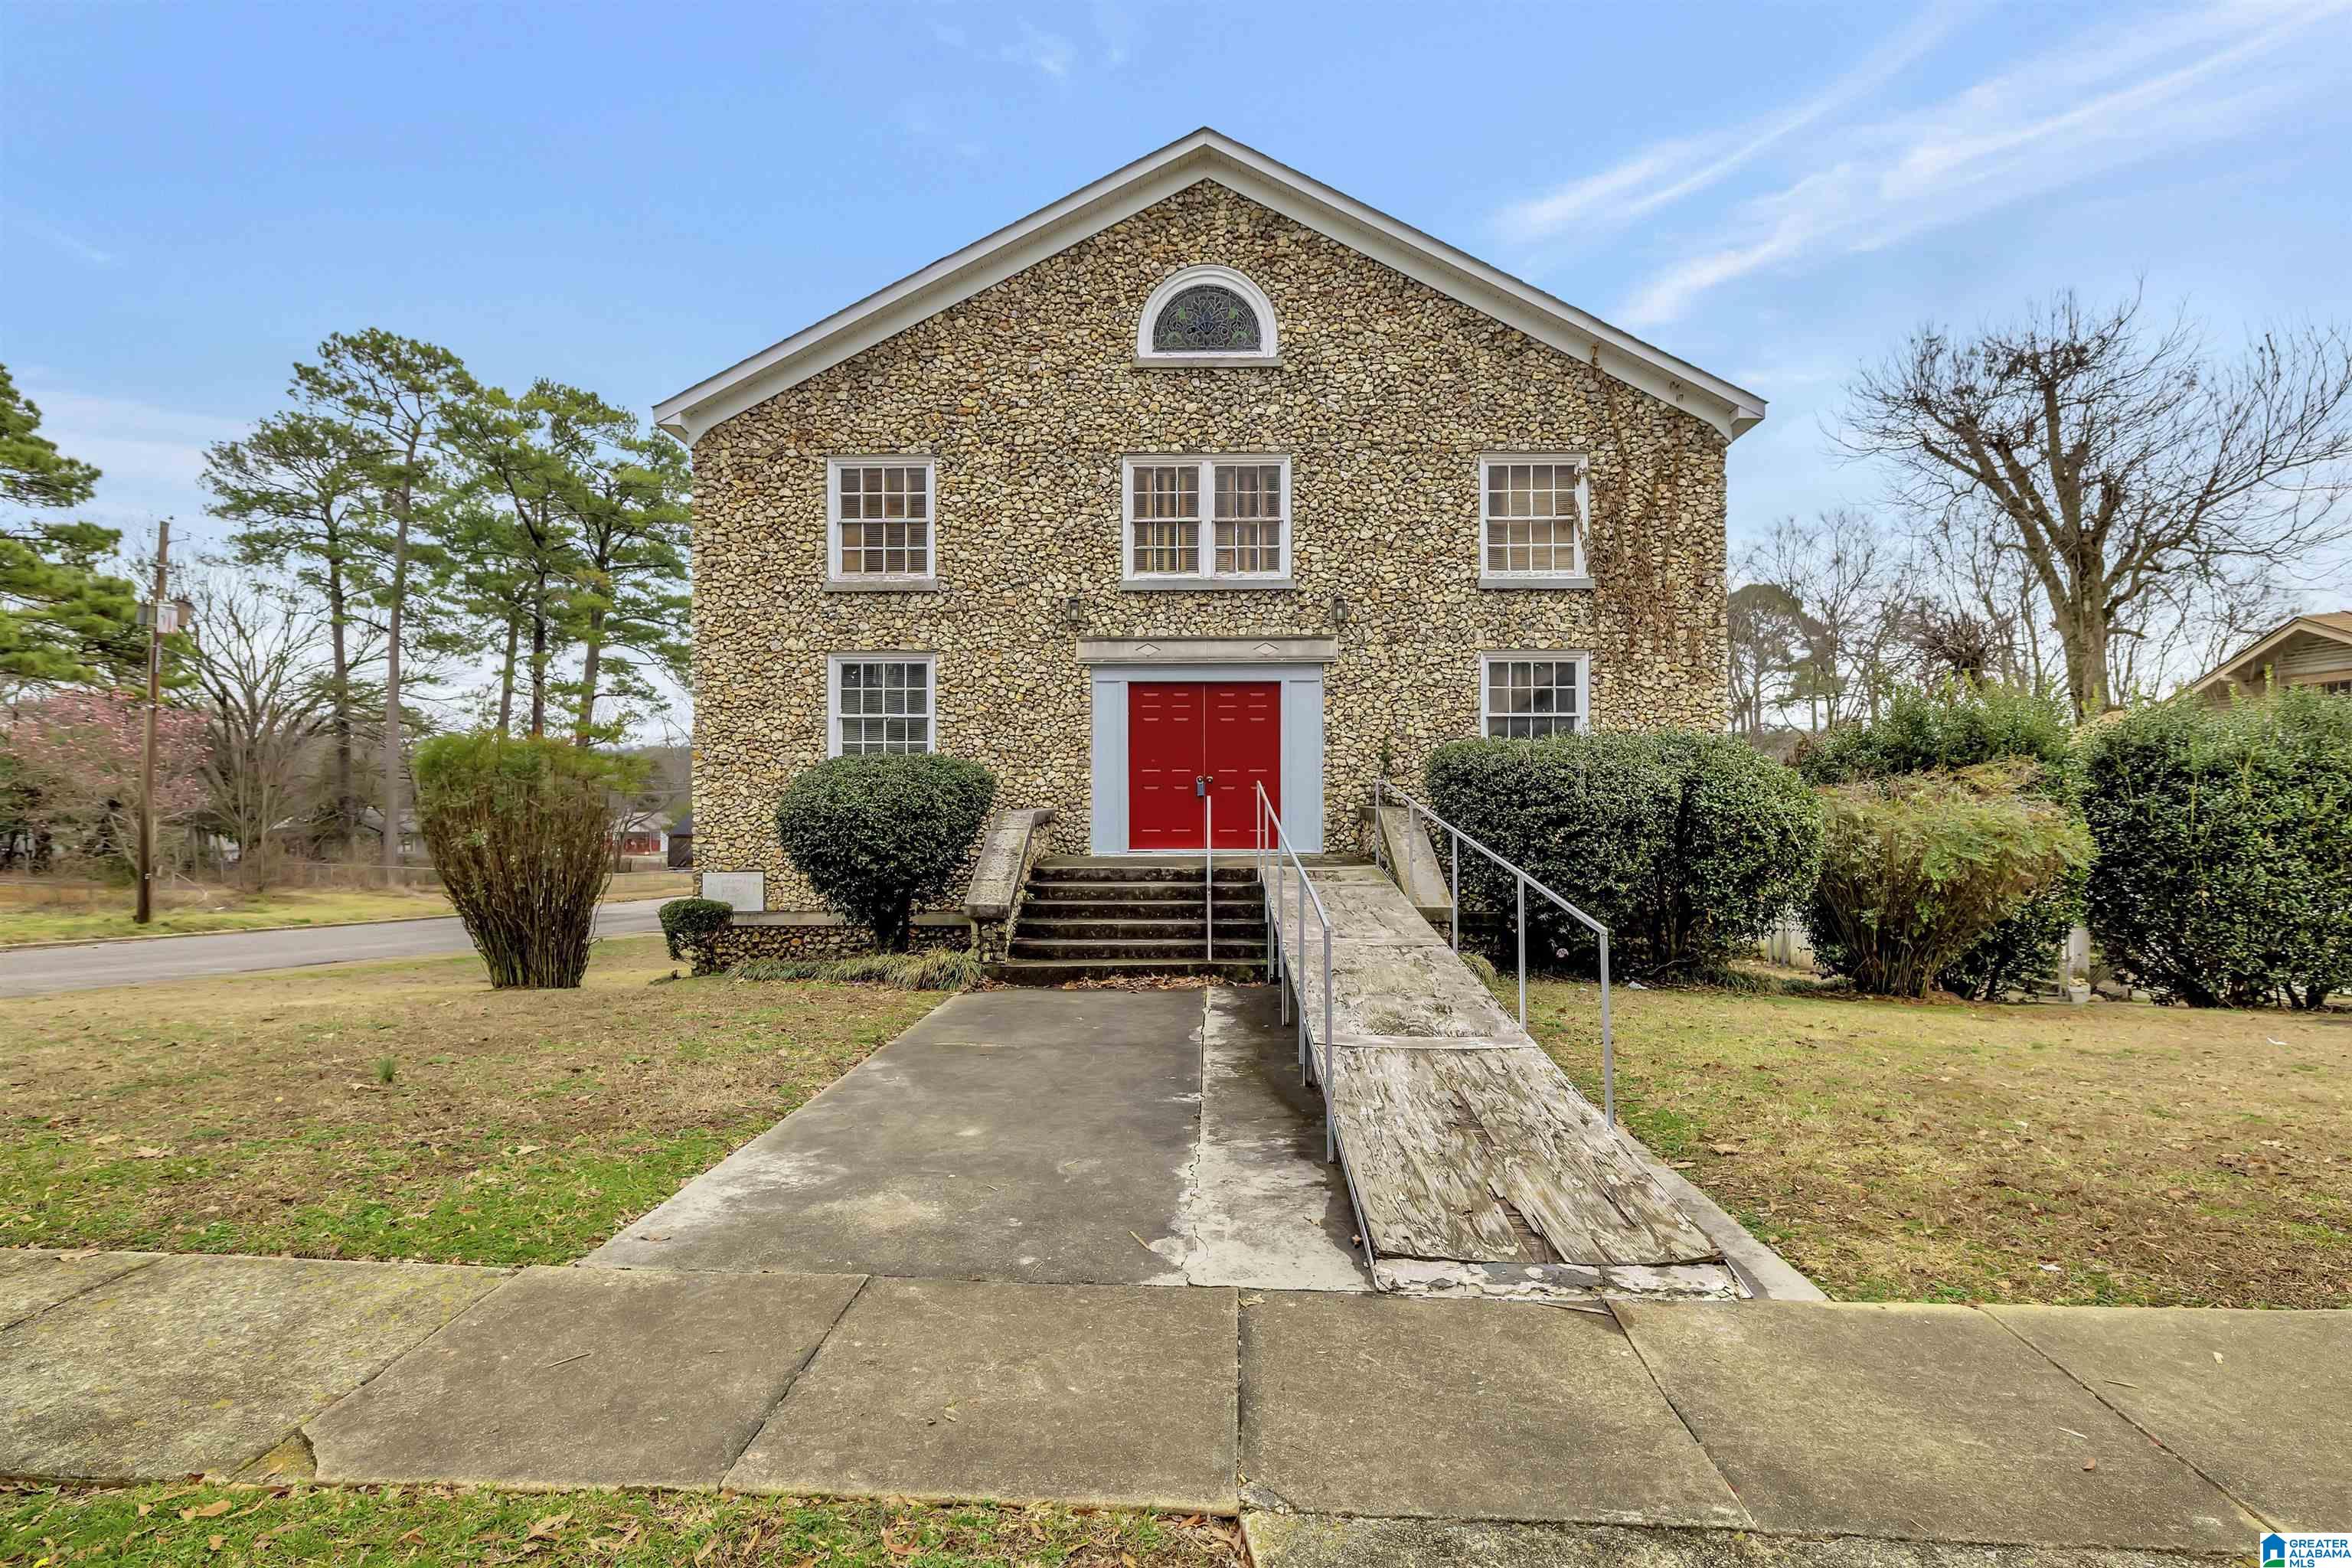 Looking for a building with lots of space? This is your perfect opportunity! This place is ripe with potential for multiple uses. The established sanctuary has been kept in good condition and there are plenty of opportunities for the rest of the space. Contact me to set up your showing!